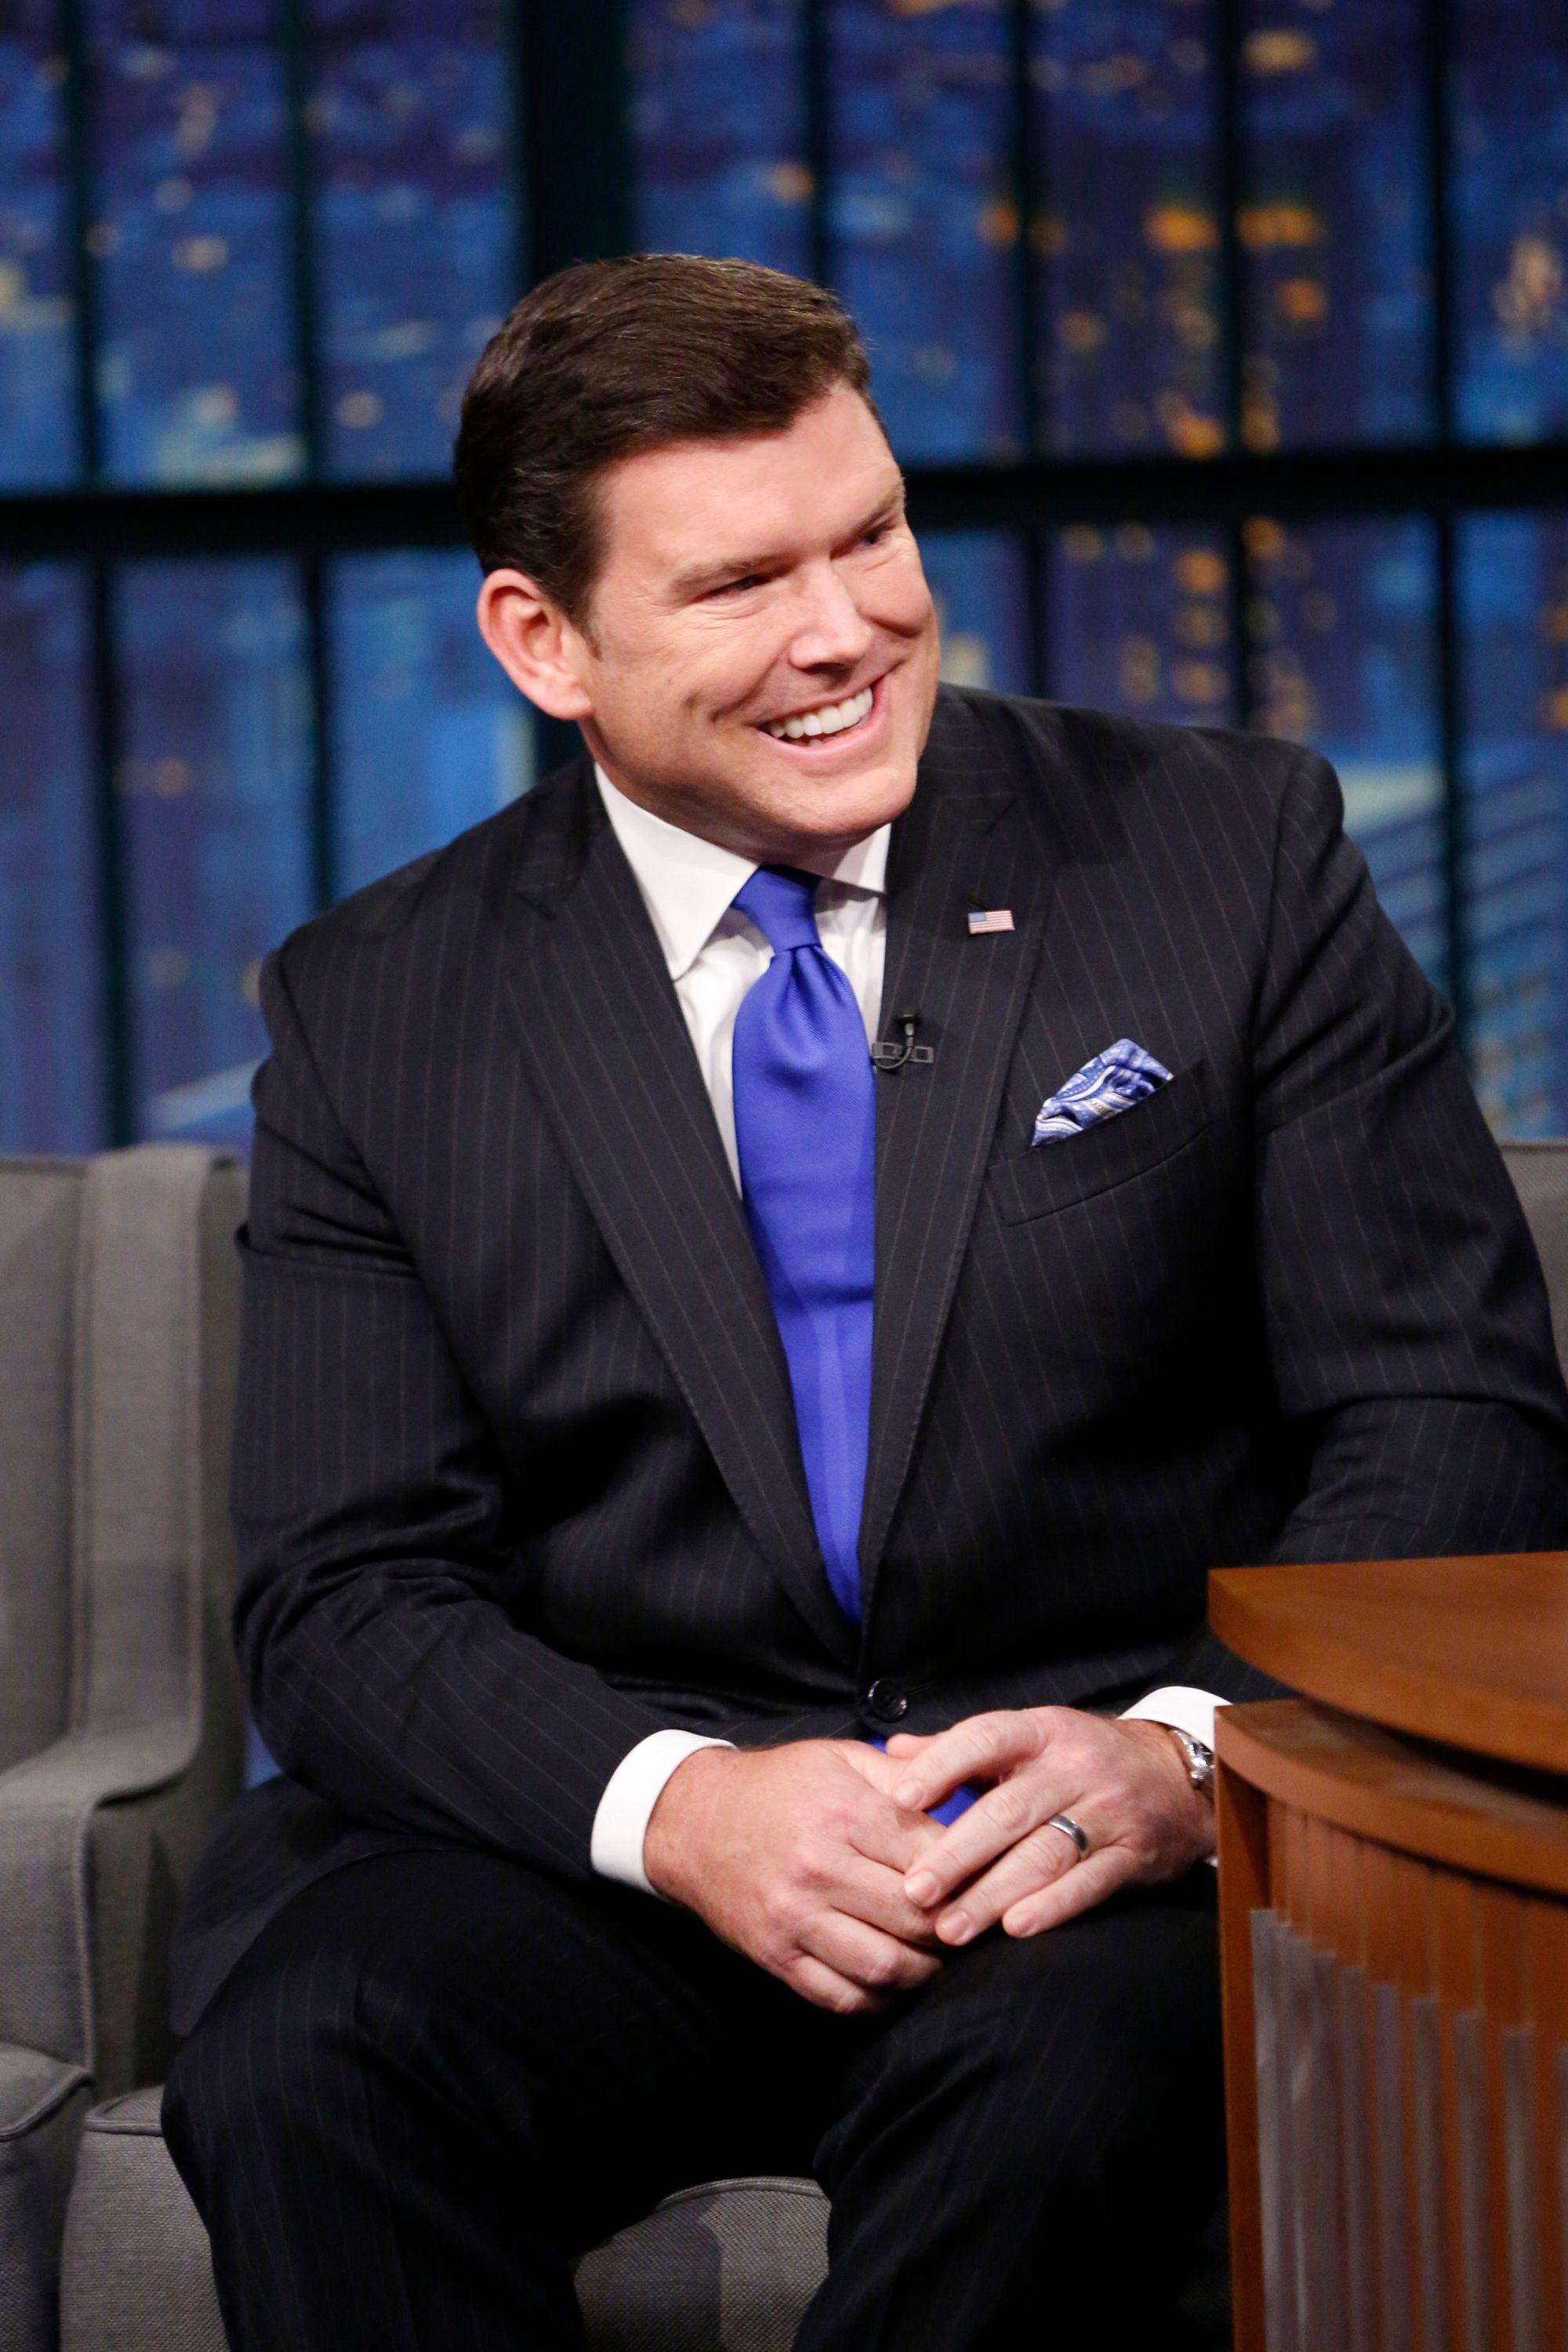 Bret Baier during an interview on season 4 of "Late Night with Seth Meyers" on December 8, 2016 | Photo: Lloyd Bishop/NBCU Photo Bank/NBCUniversal/Getty Images